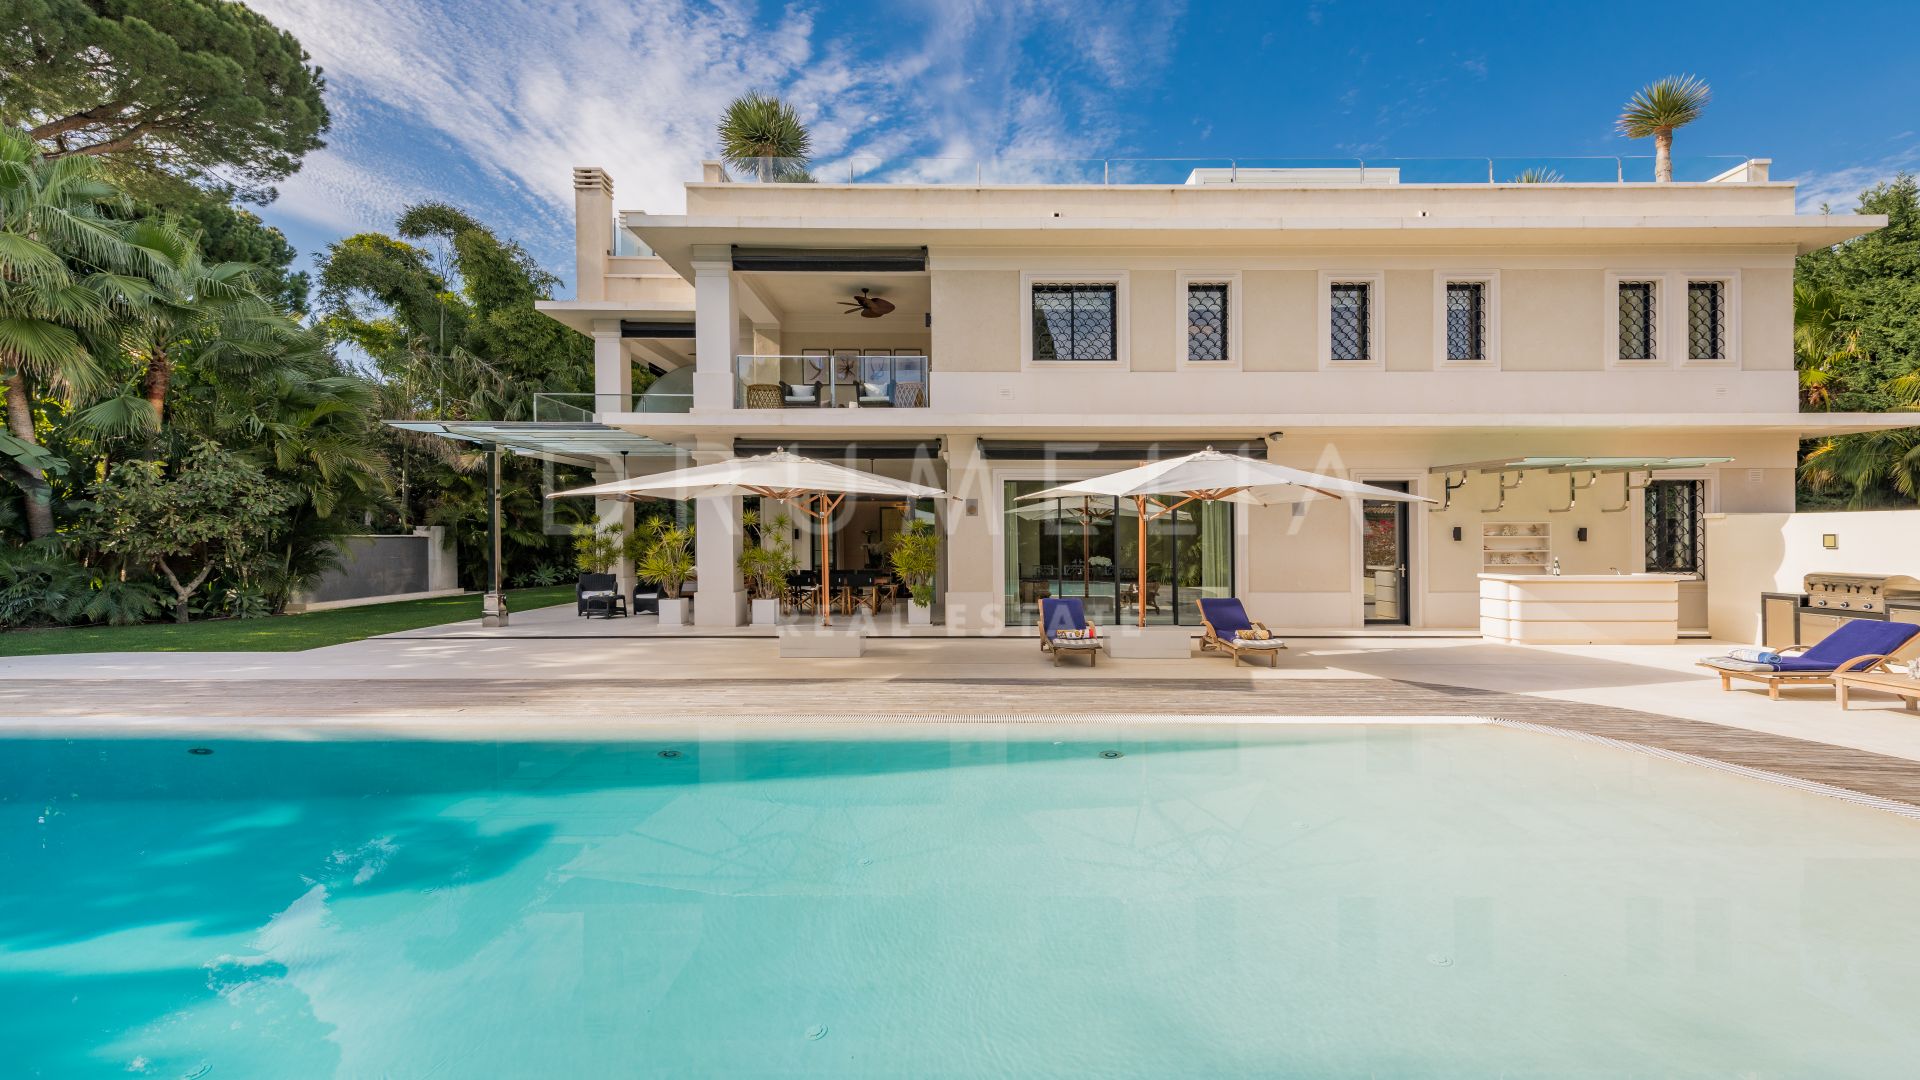 Marbella’s Golden Mile Modern Mansion with Great Design, High Quality and Privileged Location.